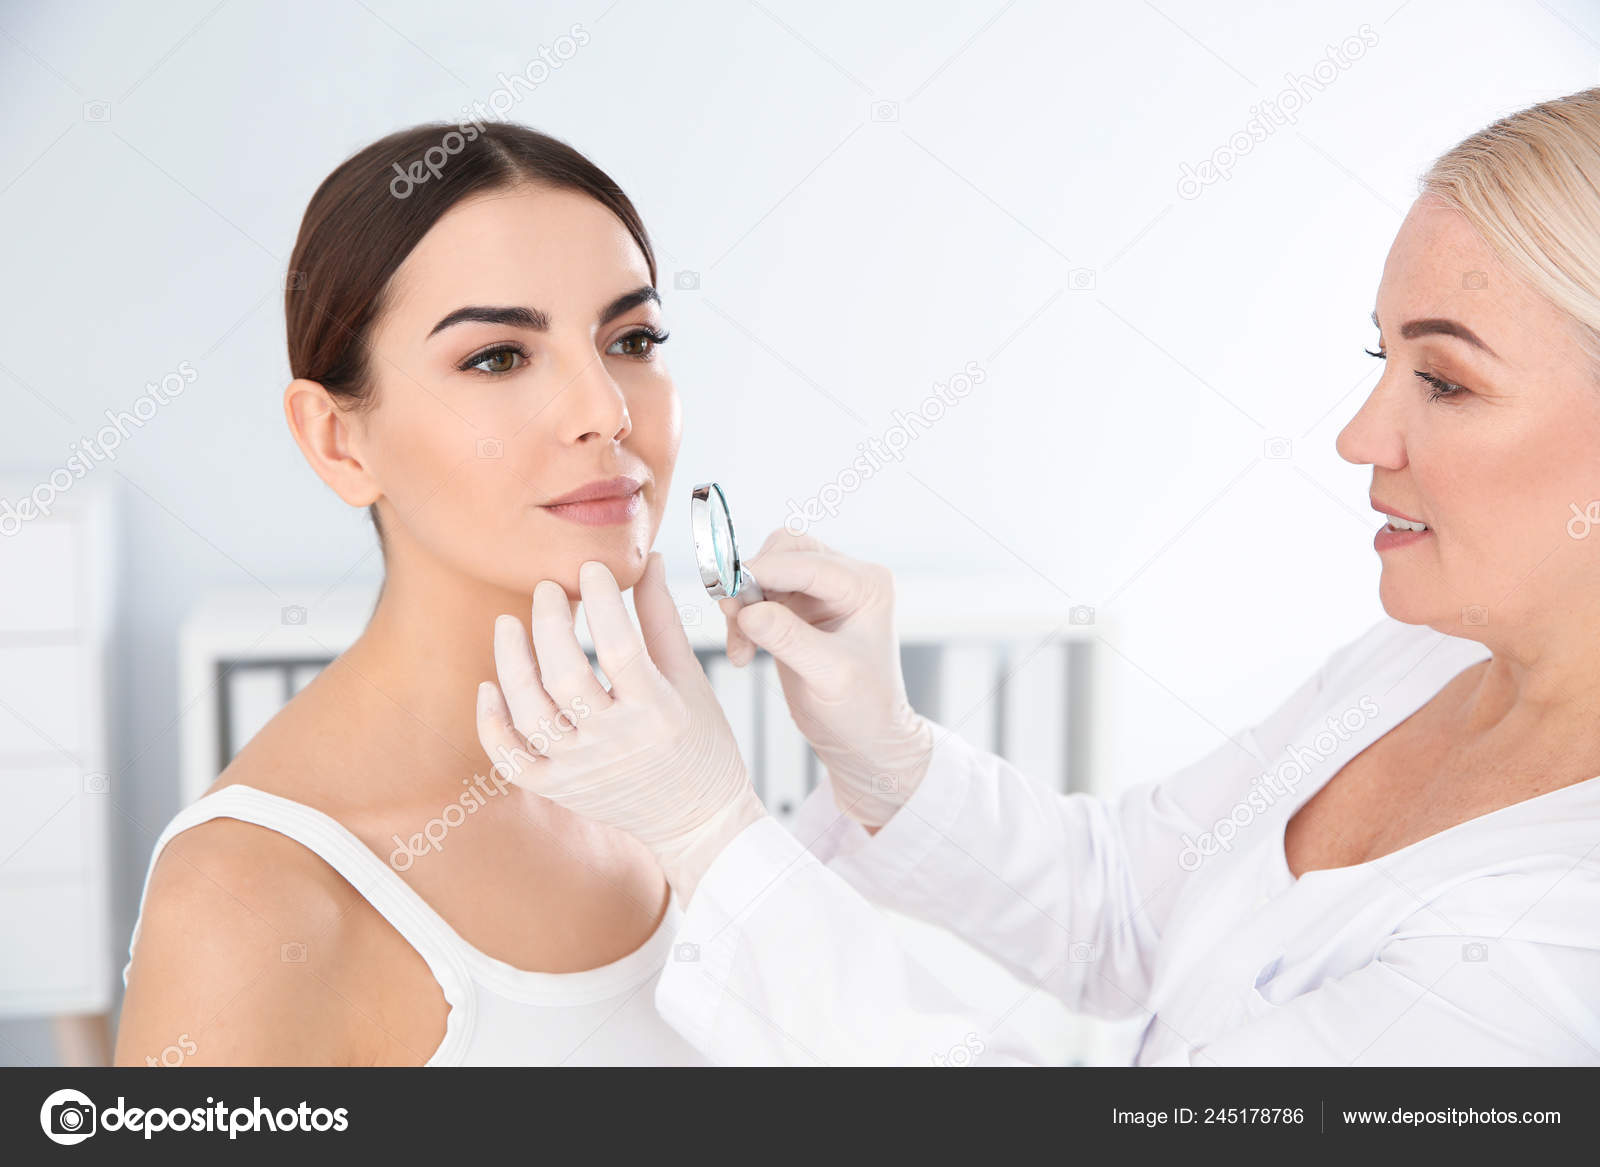 Dermatologist Examining Young Patients Birthmark Magnifying Glass